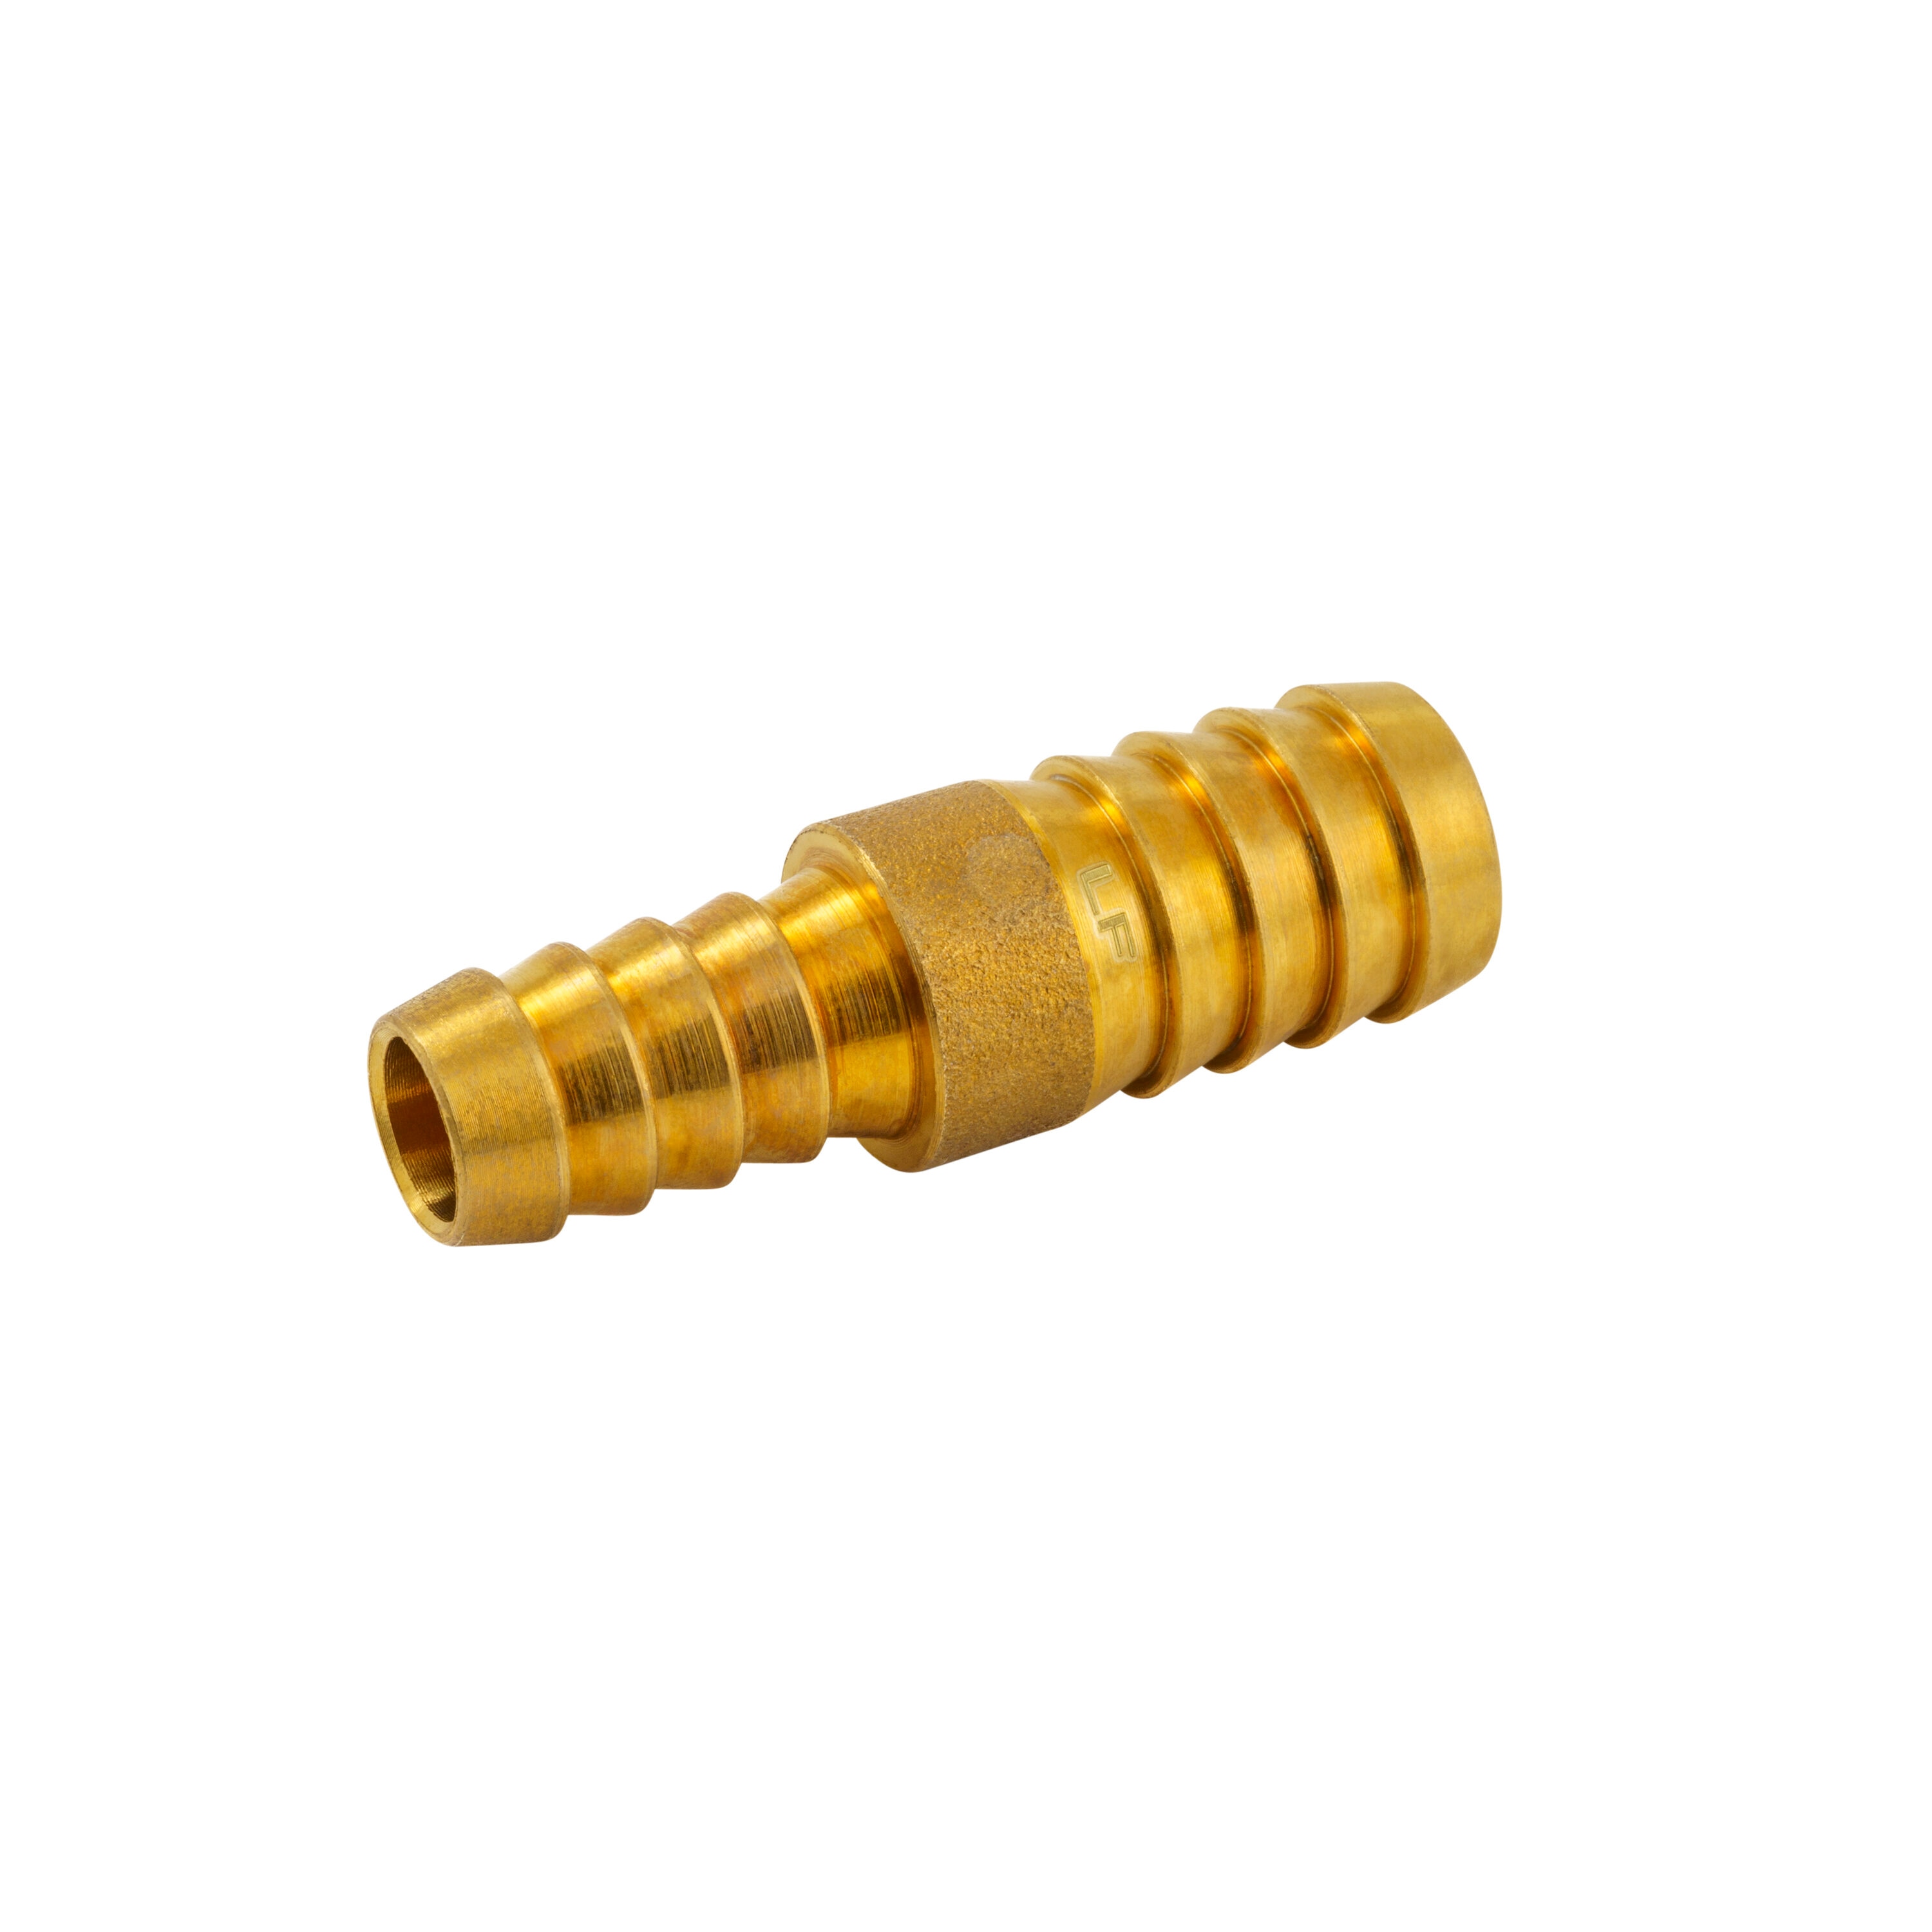 NEW (2) PK. BRASS 3/8 IN. MNPT X HOSE BARB STRAIGHT FITTING FOR 3/8 IN. ID  HOSE